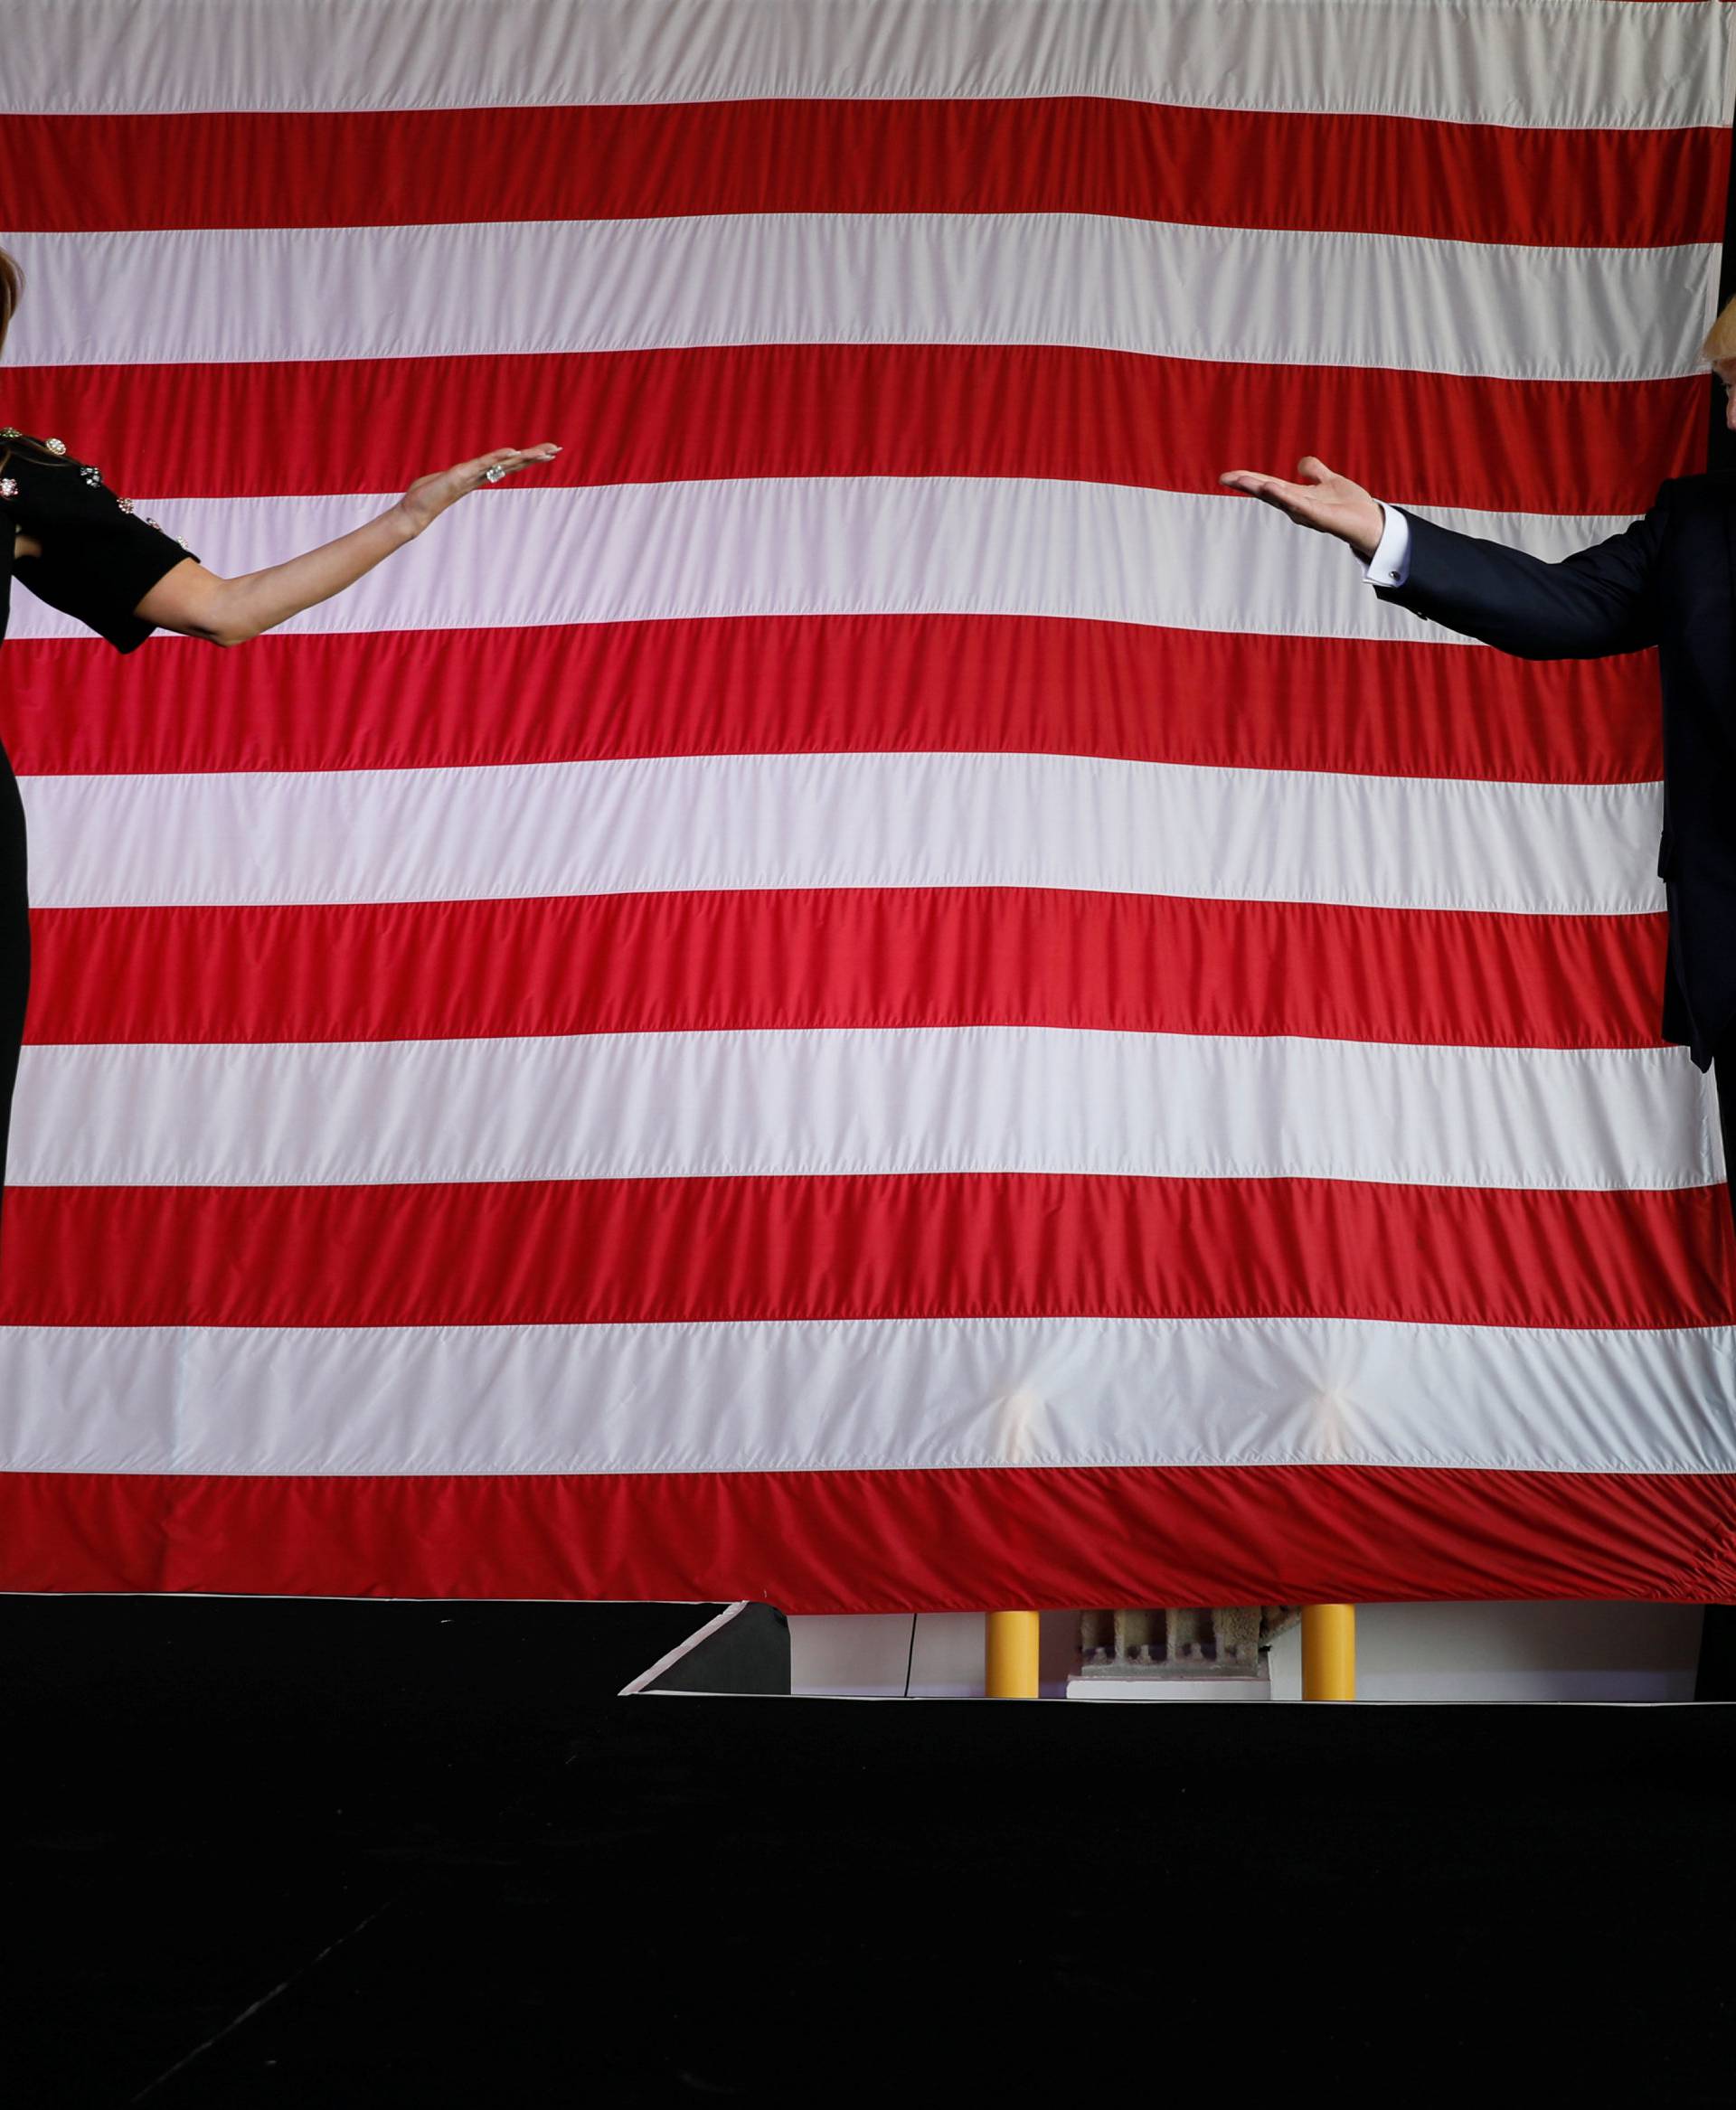 Trump and the first lady take the stage to rally with service members at Sigonella Air Force Base at Naval Air Station Sigonella at the end of Trump's participation in the G7 summit in Sicily, Italy